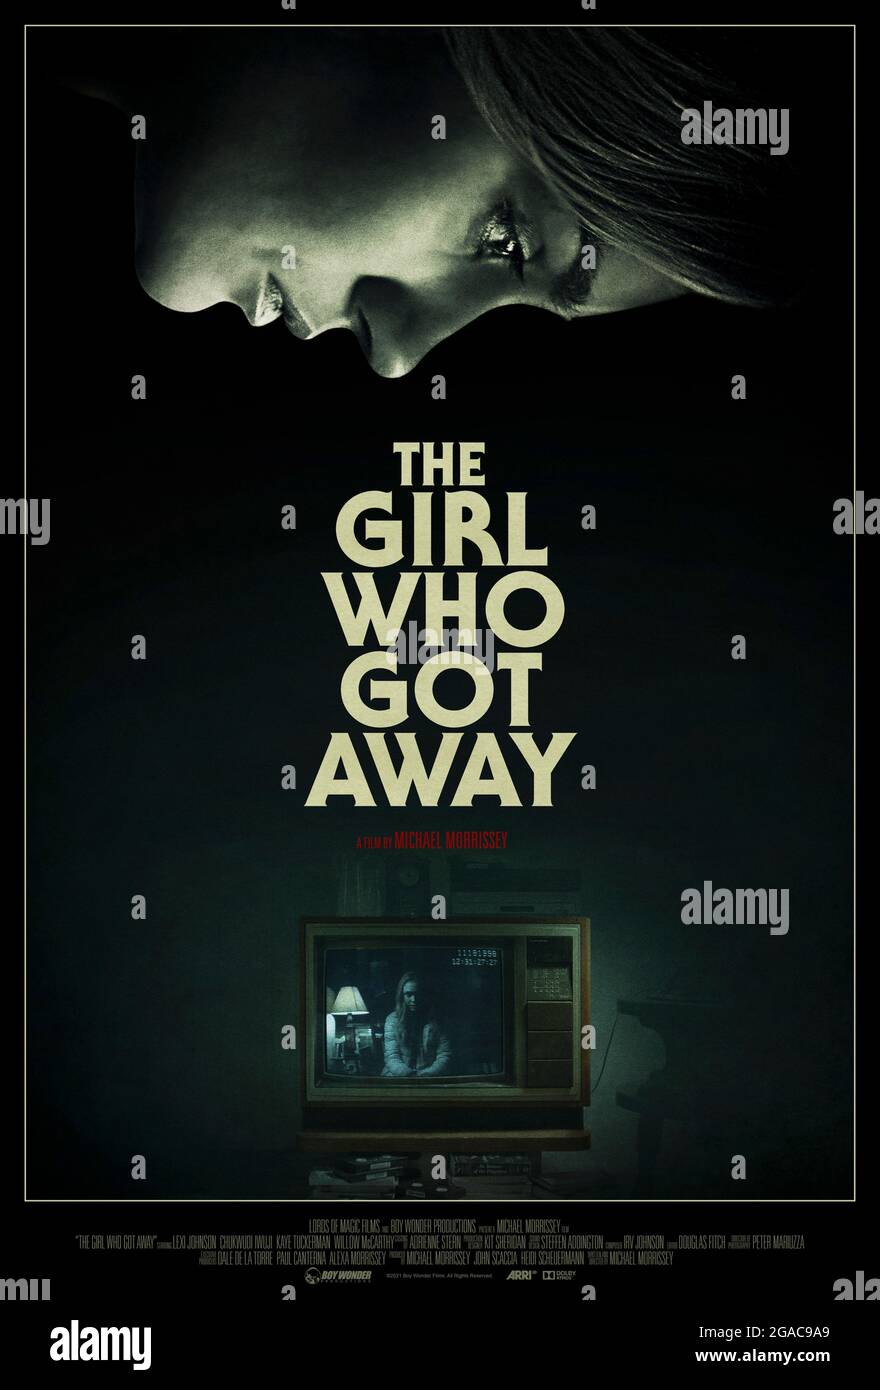 The Girl Who Got Away (2021) directed by Michael Morrissey and starring Kaye Tuckerman, Anni Krueger and Audrey Grace Marshal. A female serial killer escapes from prison to go after the one victim that got away. Stock Photo